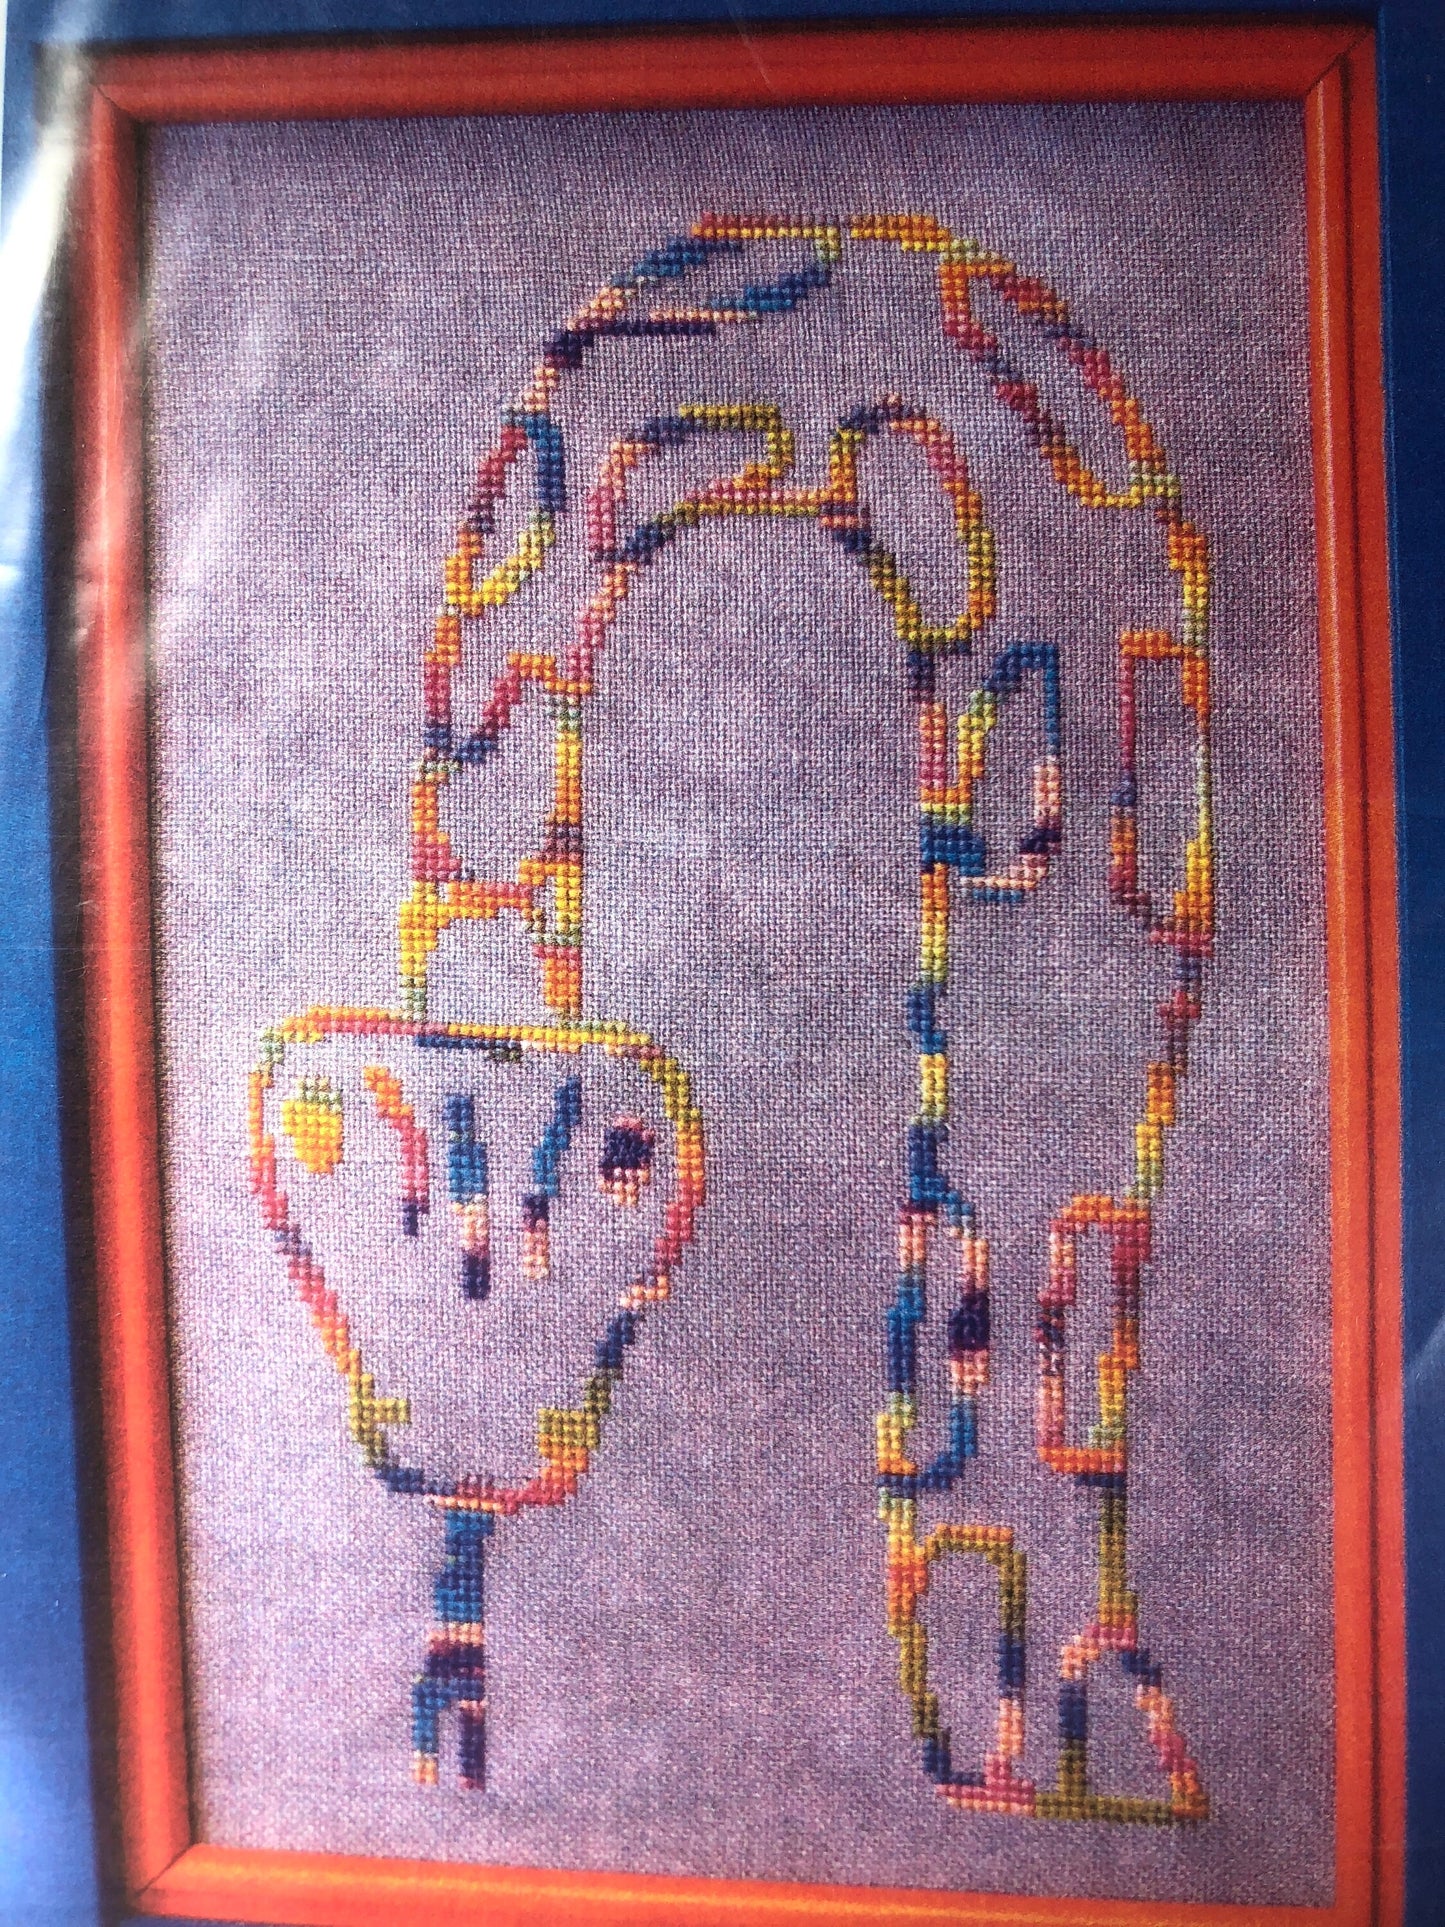 Chen Designs, Mr. Snake, 10406, Carolyn Williams, Counted Cross Stitch, Pattern